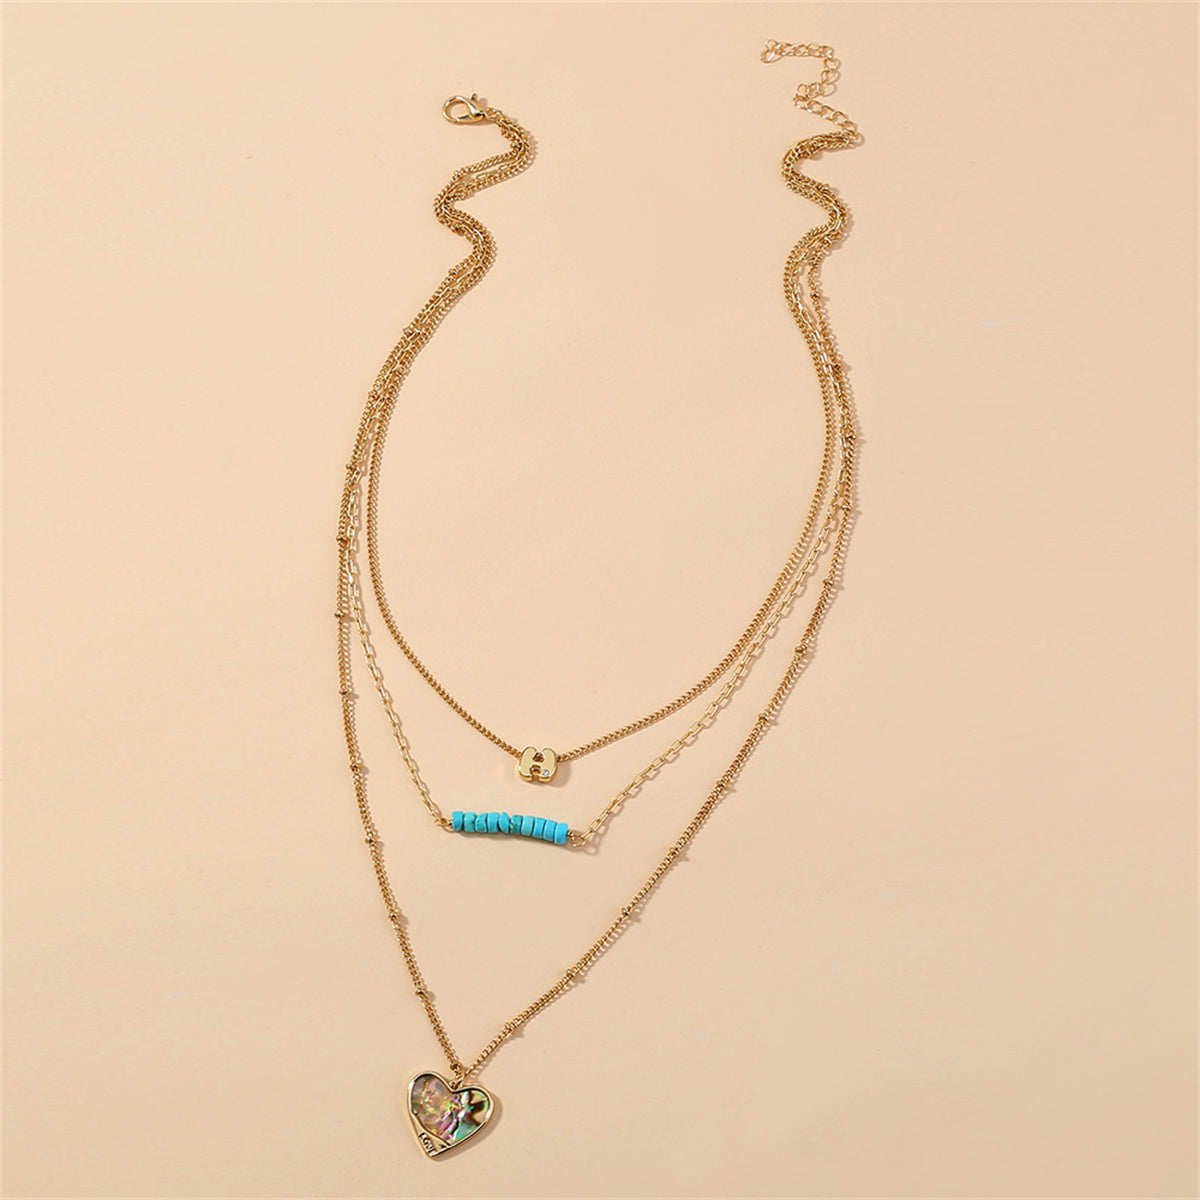 Turquoise & Abalone Shell 18K Gold-Plated Heart Layered Pendant Necklace